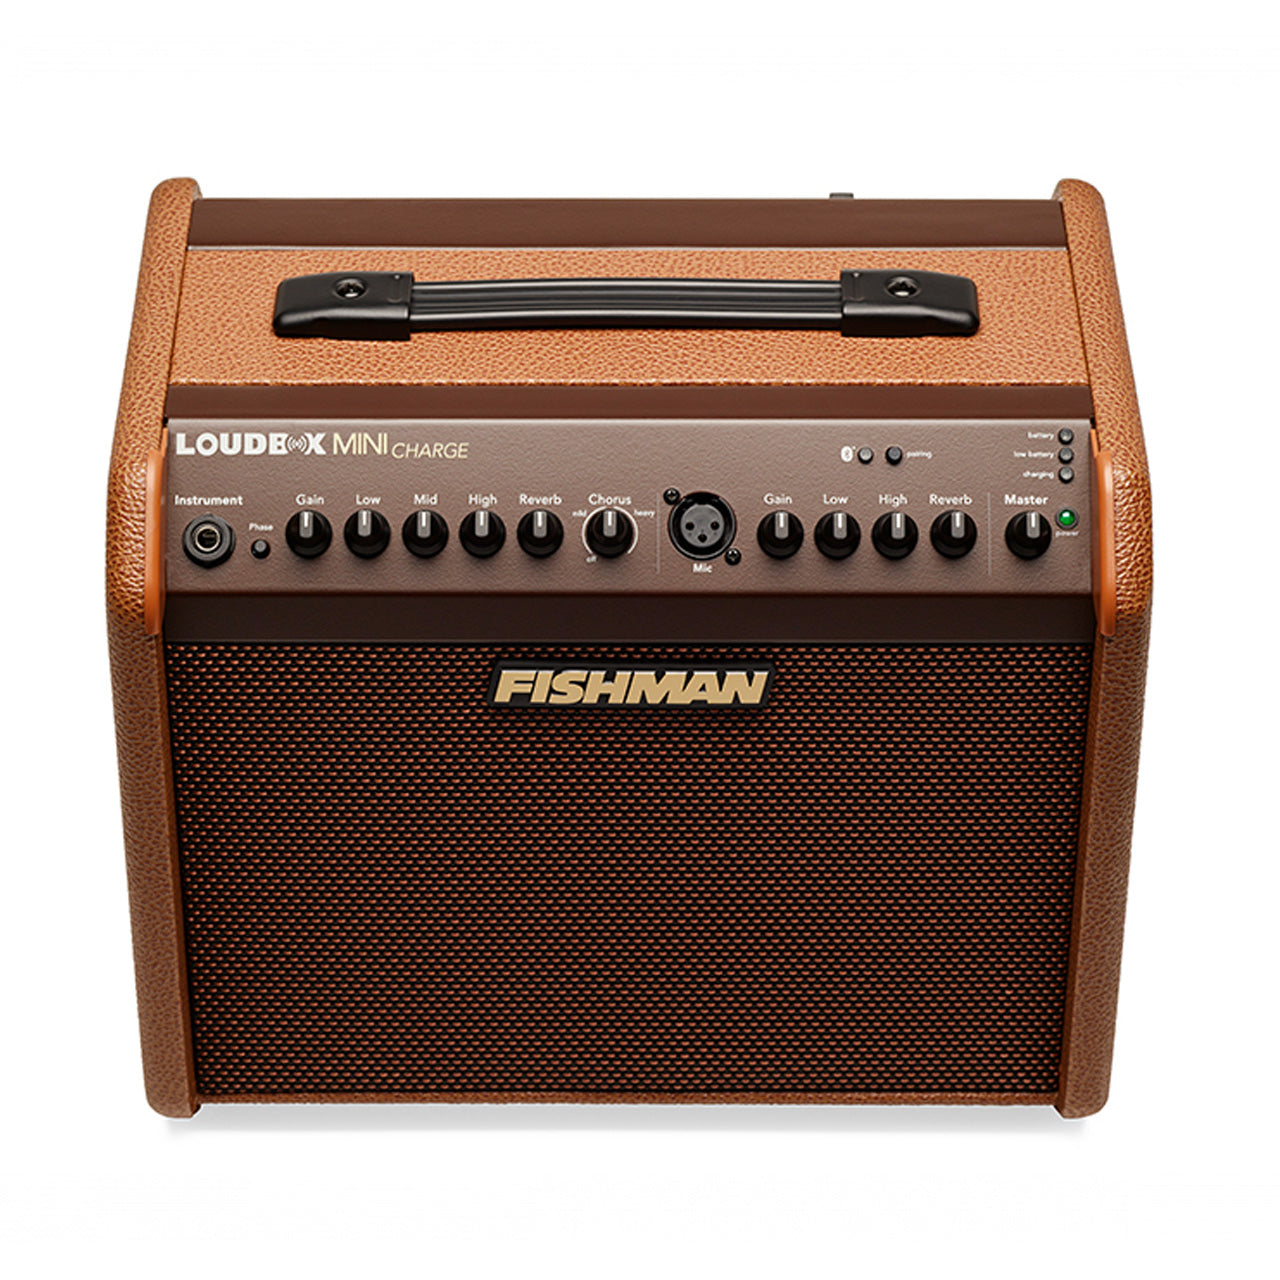 Fishman Loudbox Mini Charge Battery-Powered Acoustic Instrument Amplifier, controls